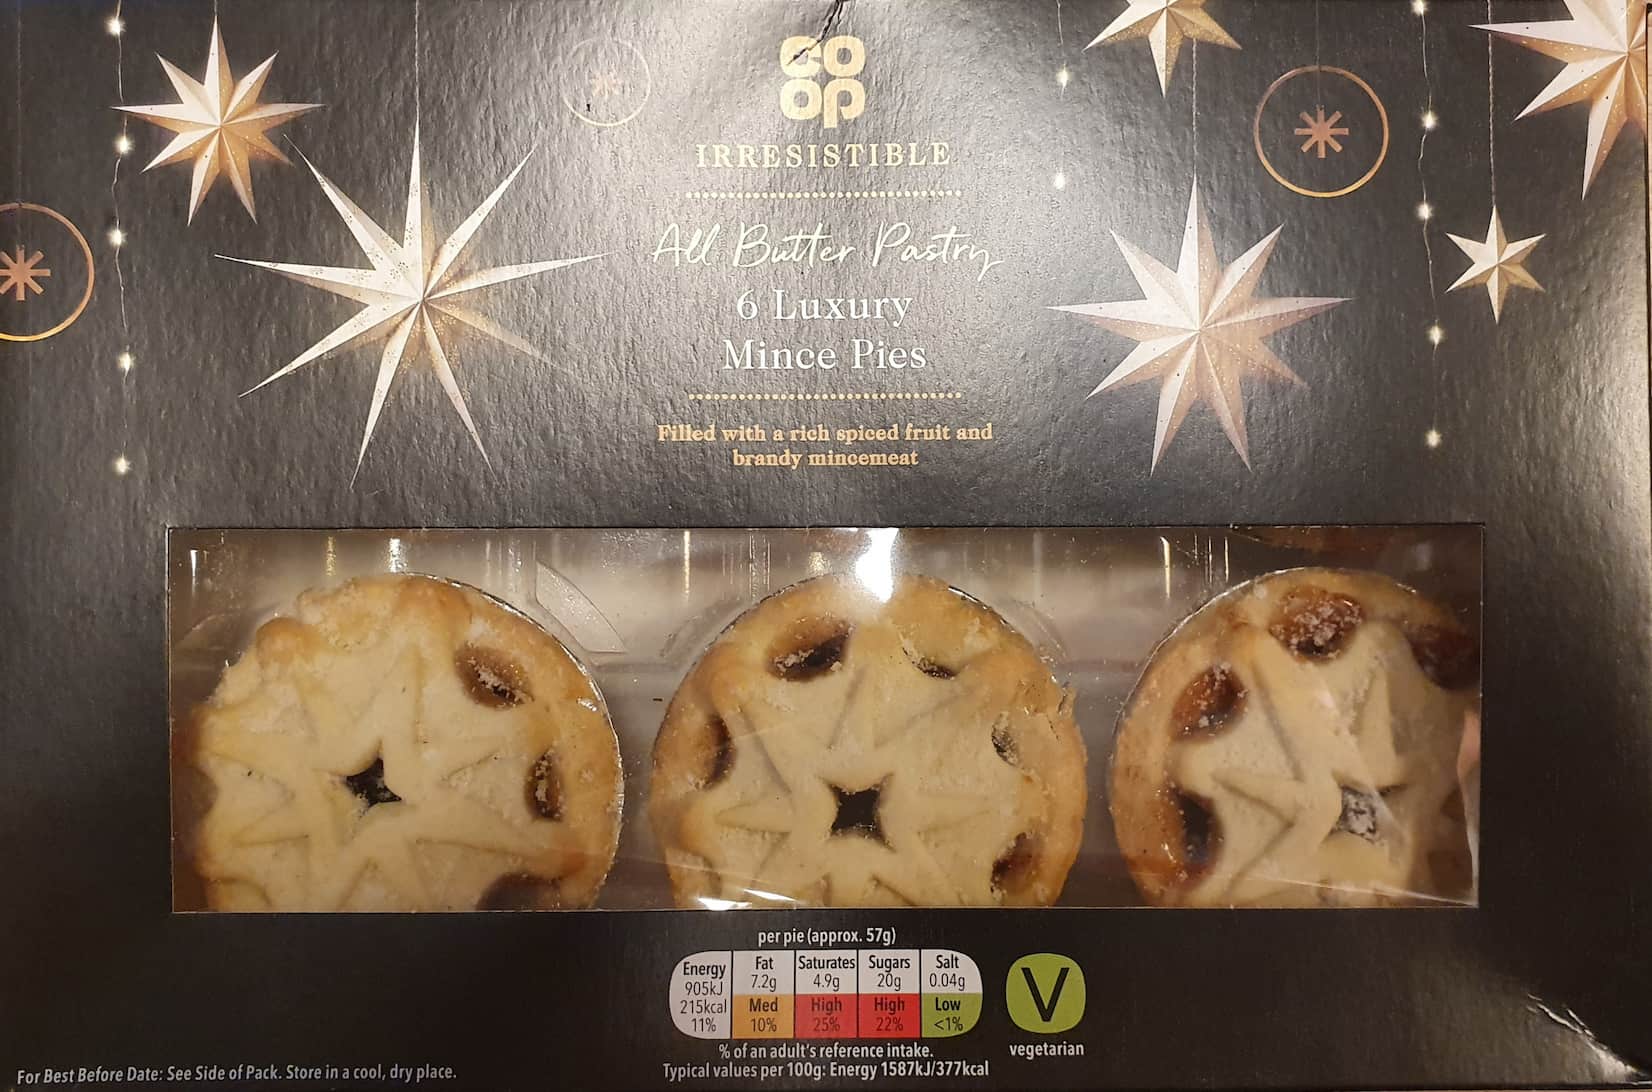 Co-op Irresistible All Butter Pastry Luxury Mince Pie Review 2021